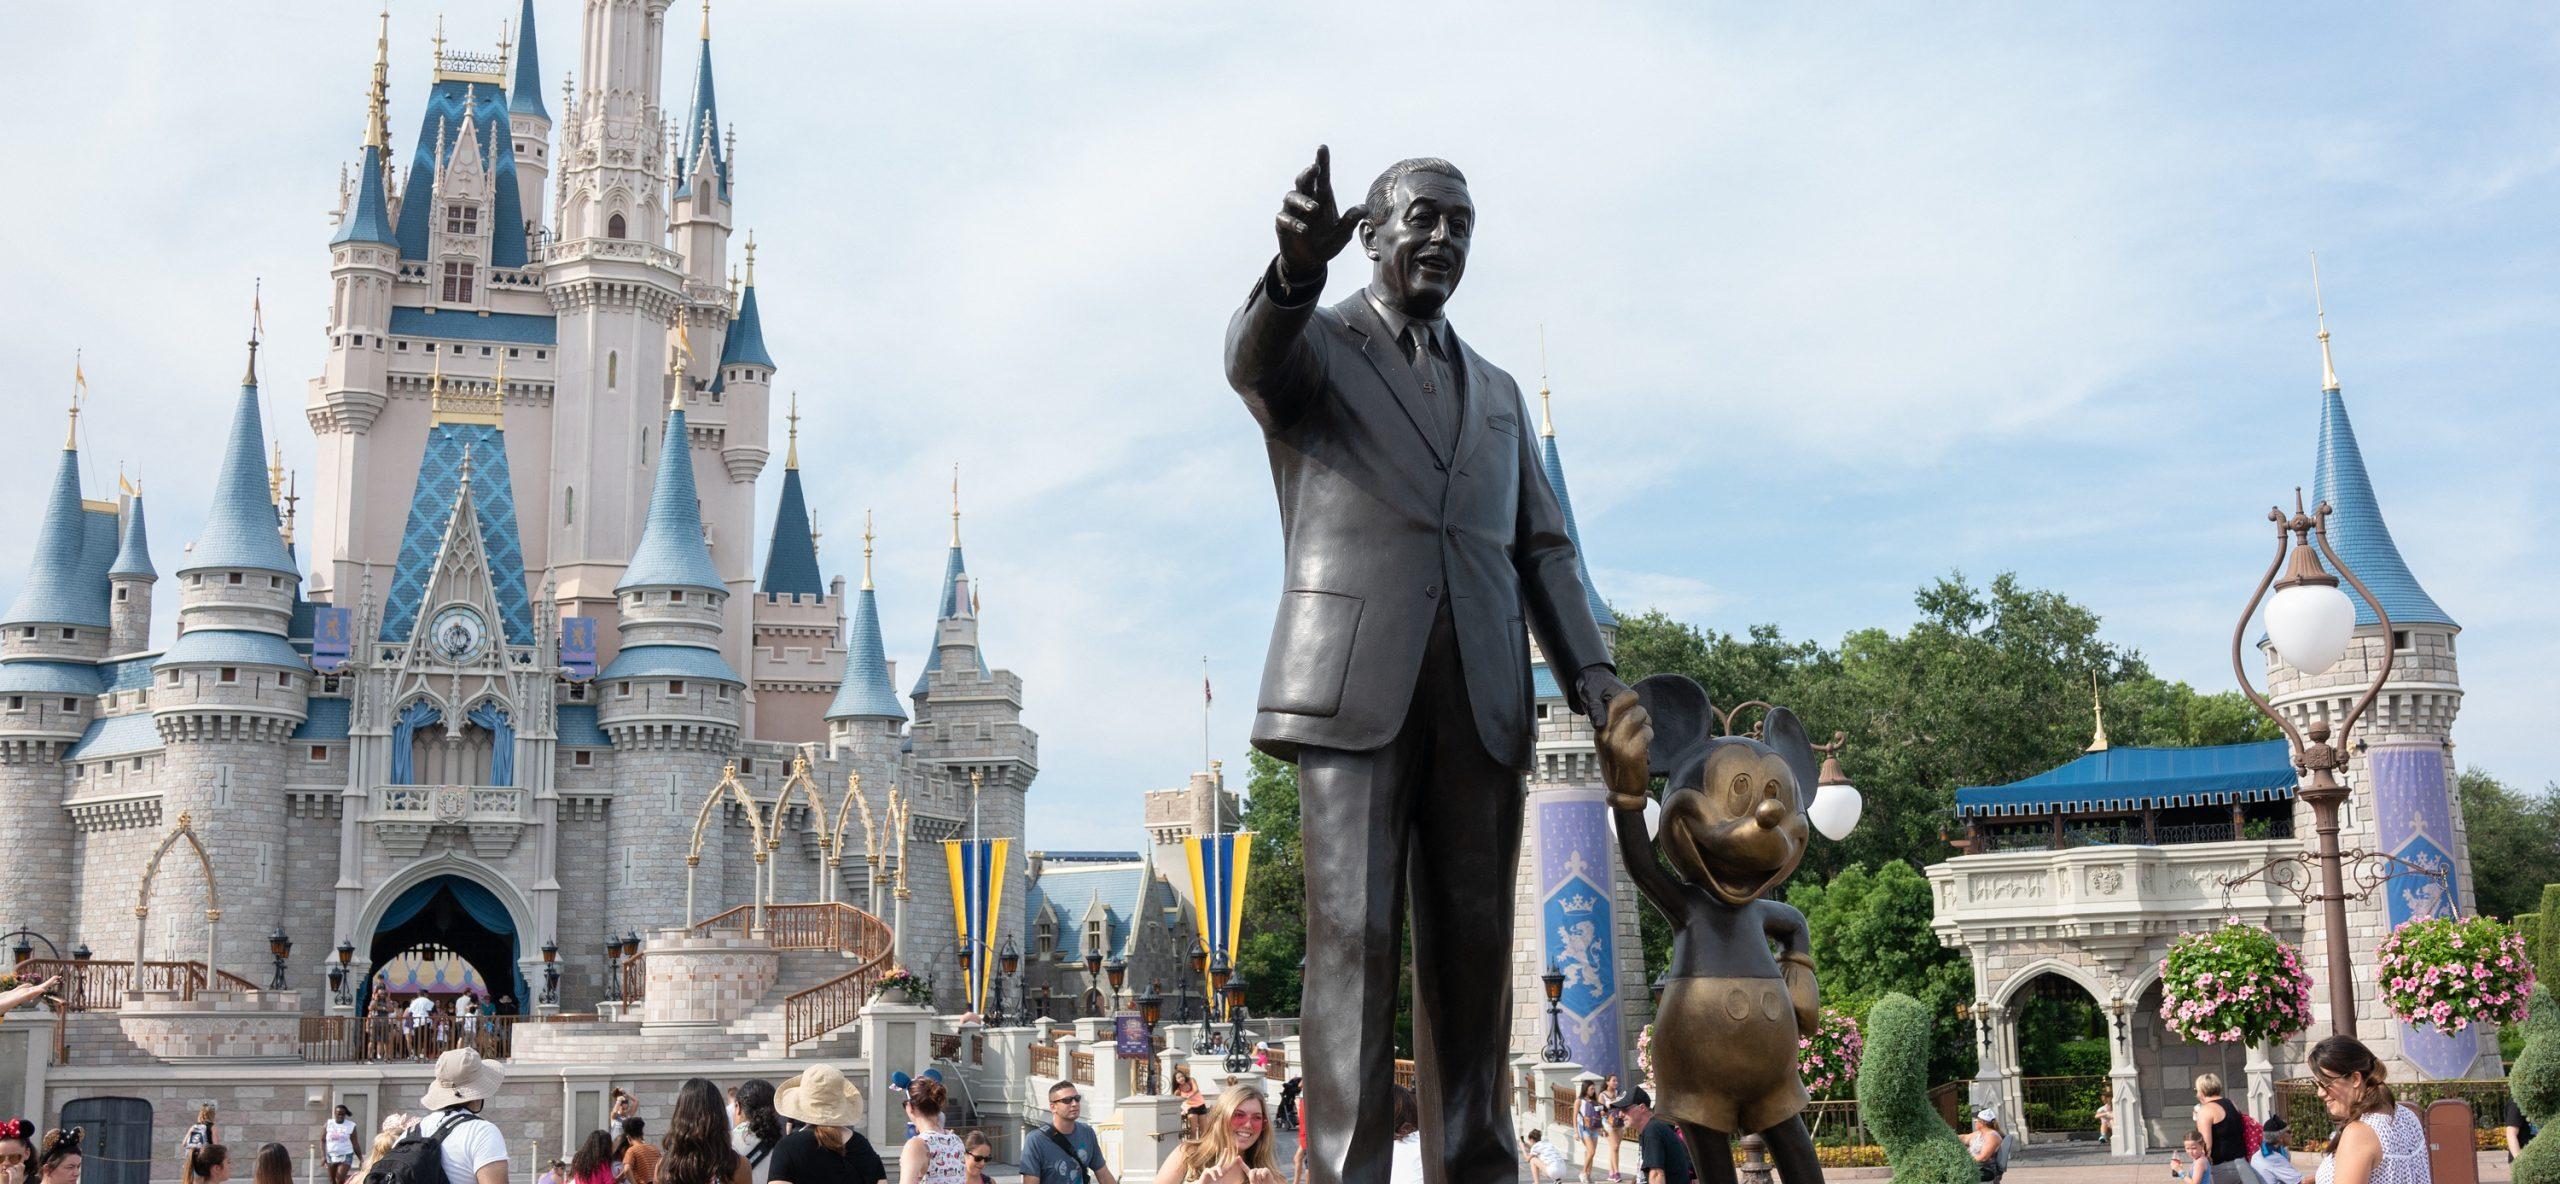 Disney World Will Bring Back Annual Pass Sales This Month